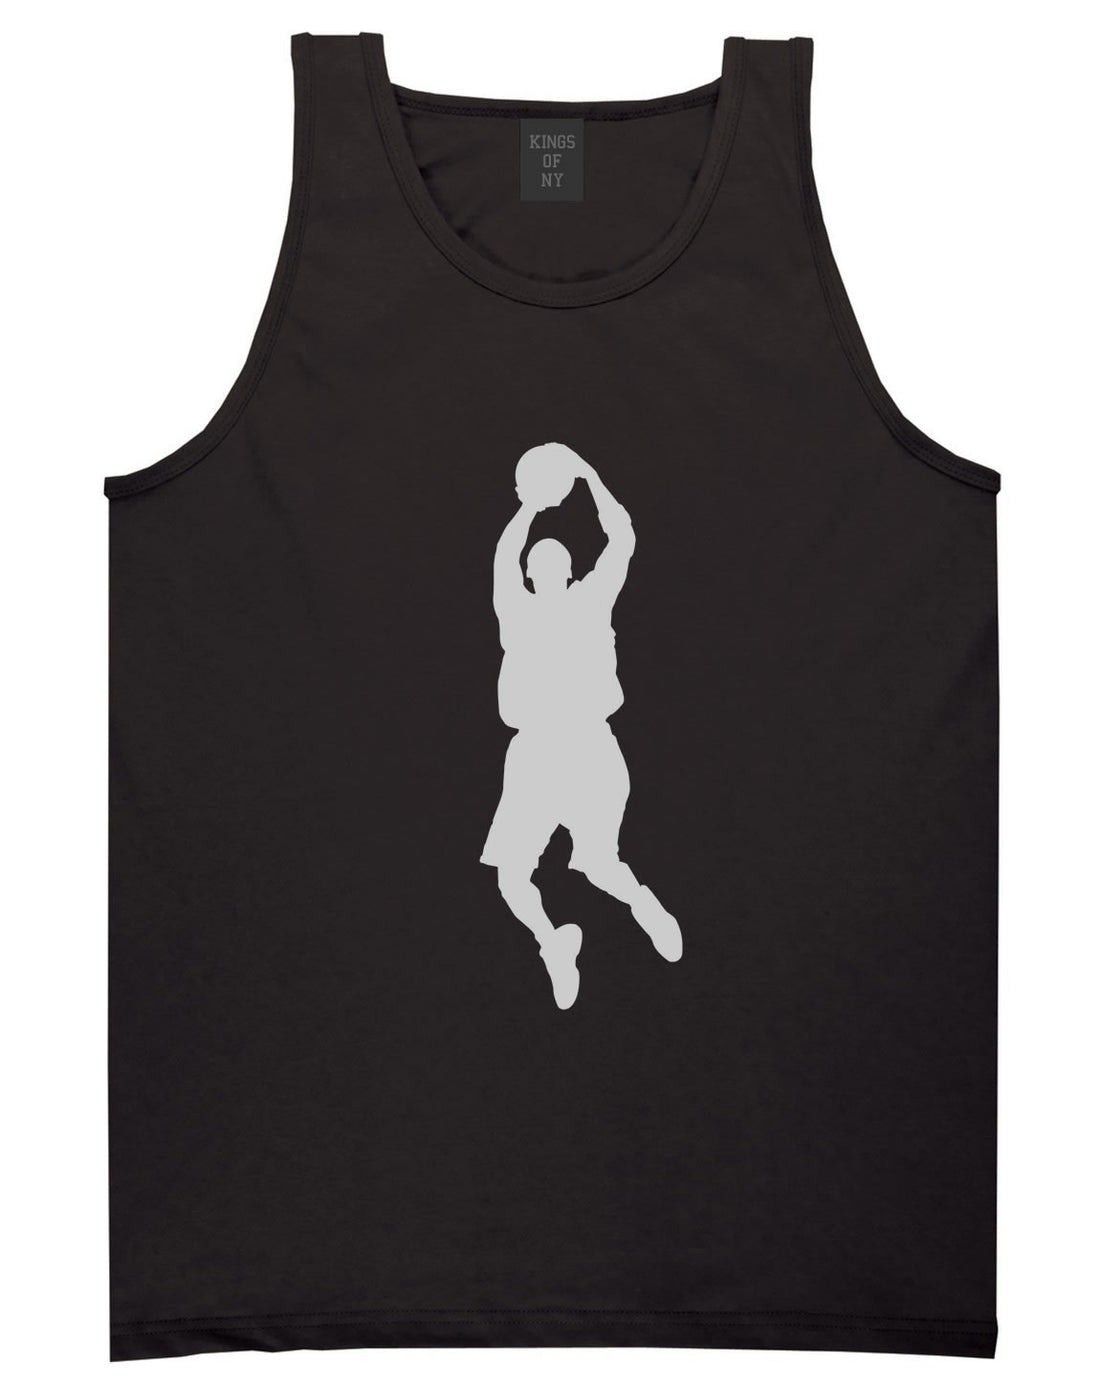 Basketball Shooter Tank Top by Kings Of NY